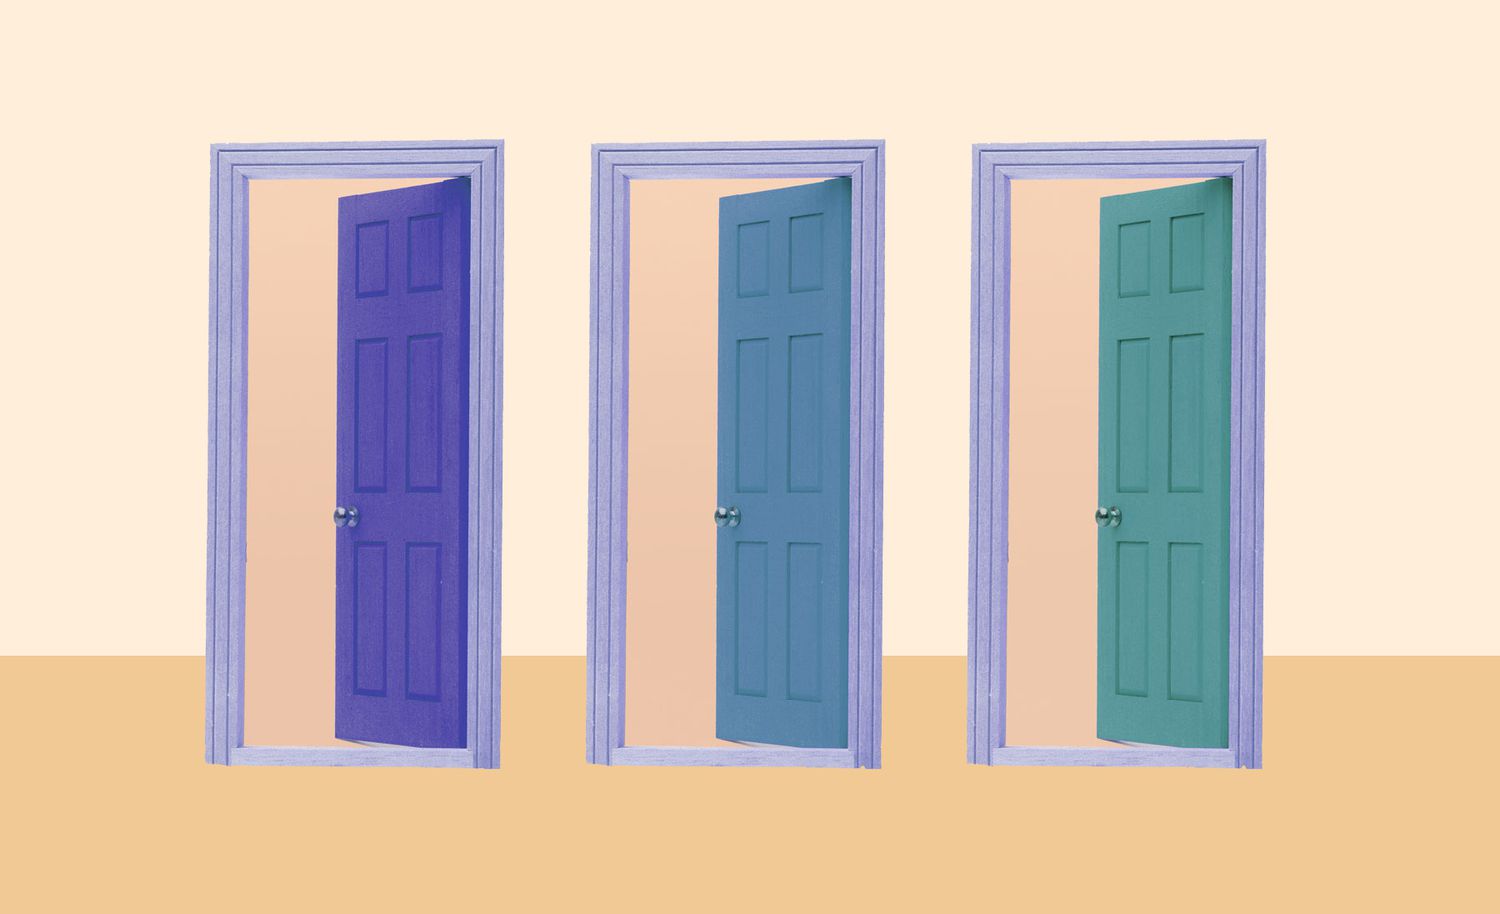 Trend Alert: Painted Interior Doors Are the New Accent Wall | Real Simple